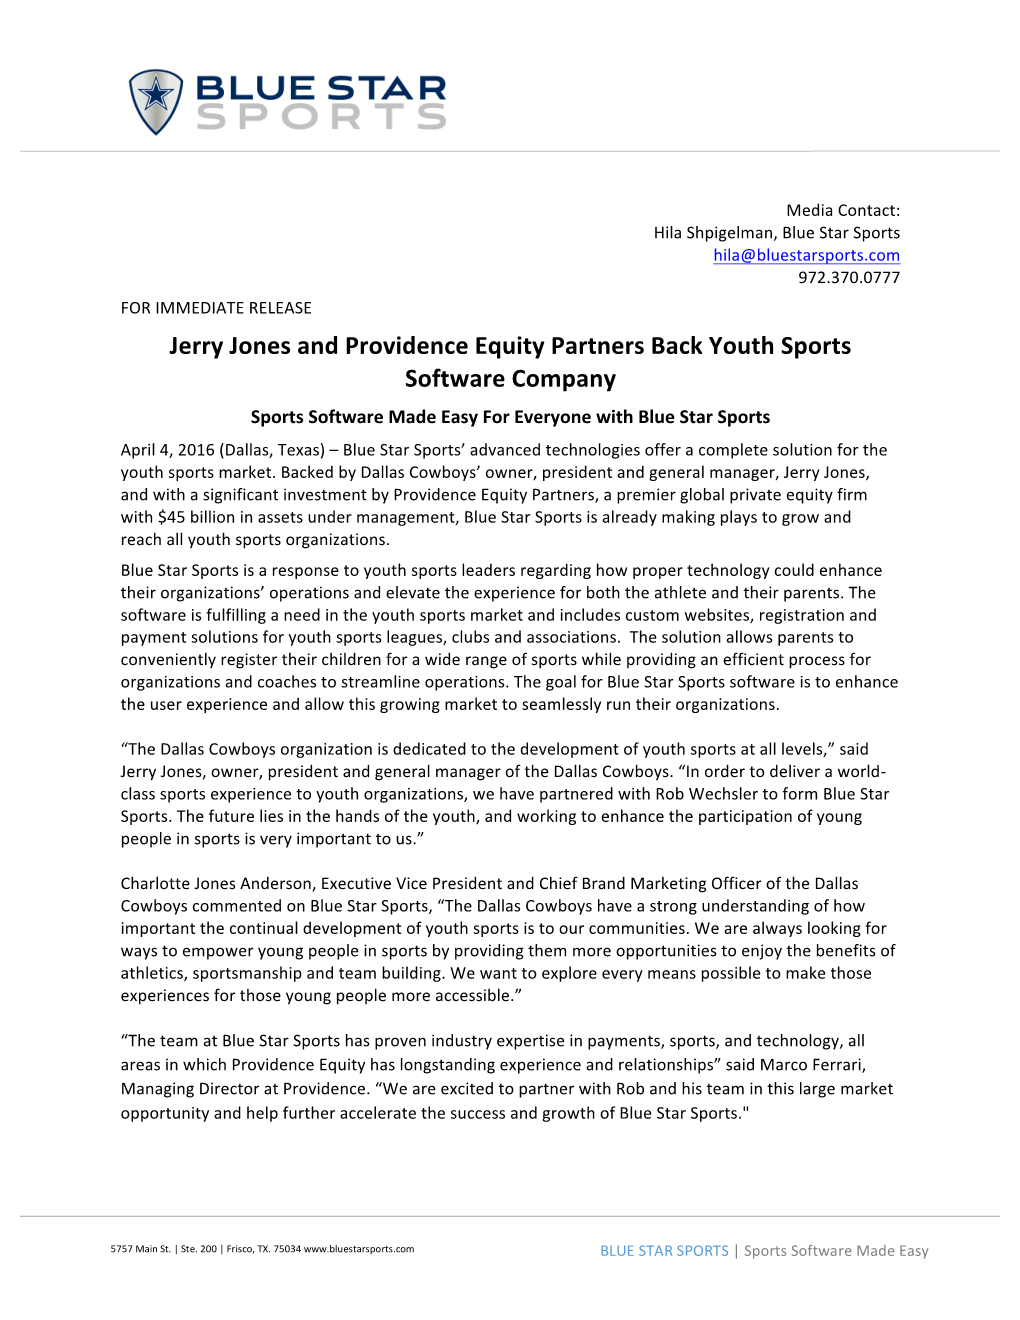 Jerry Jones and Providence Equity Partners Back Youth Sports Software Company